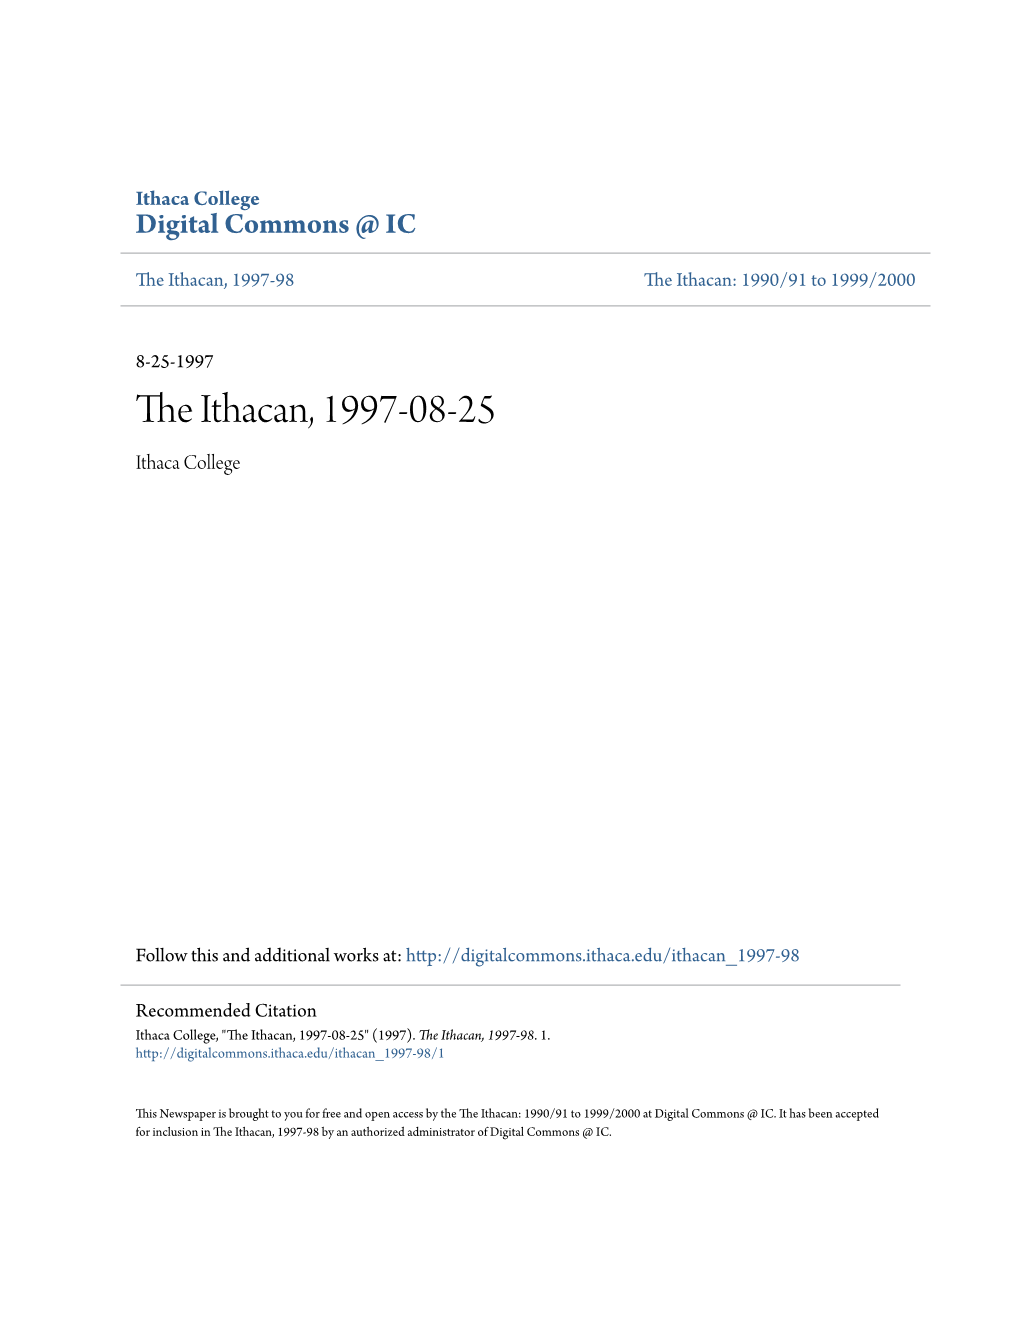 The Ithacan, 1997-08-25